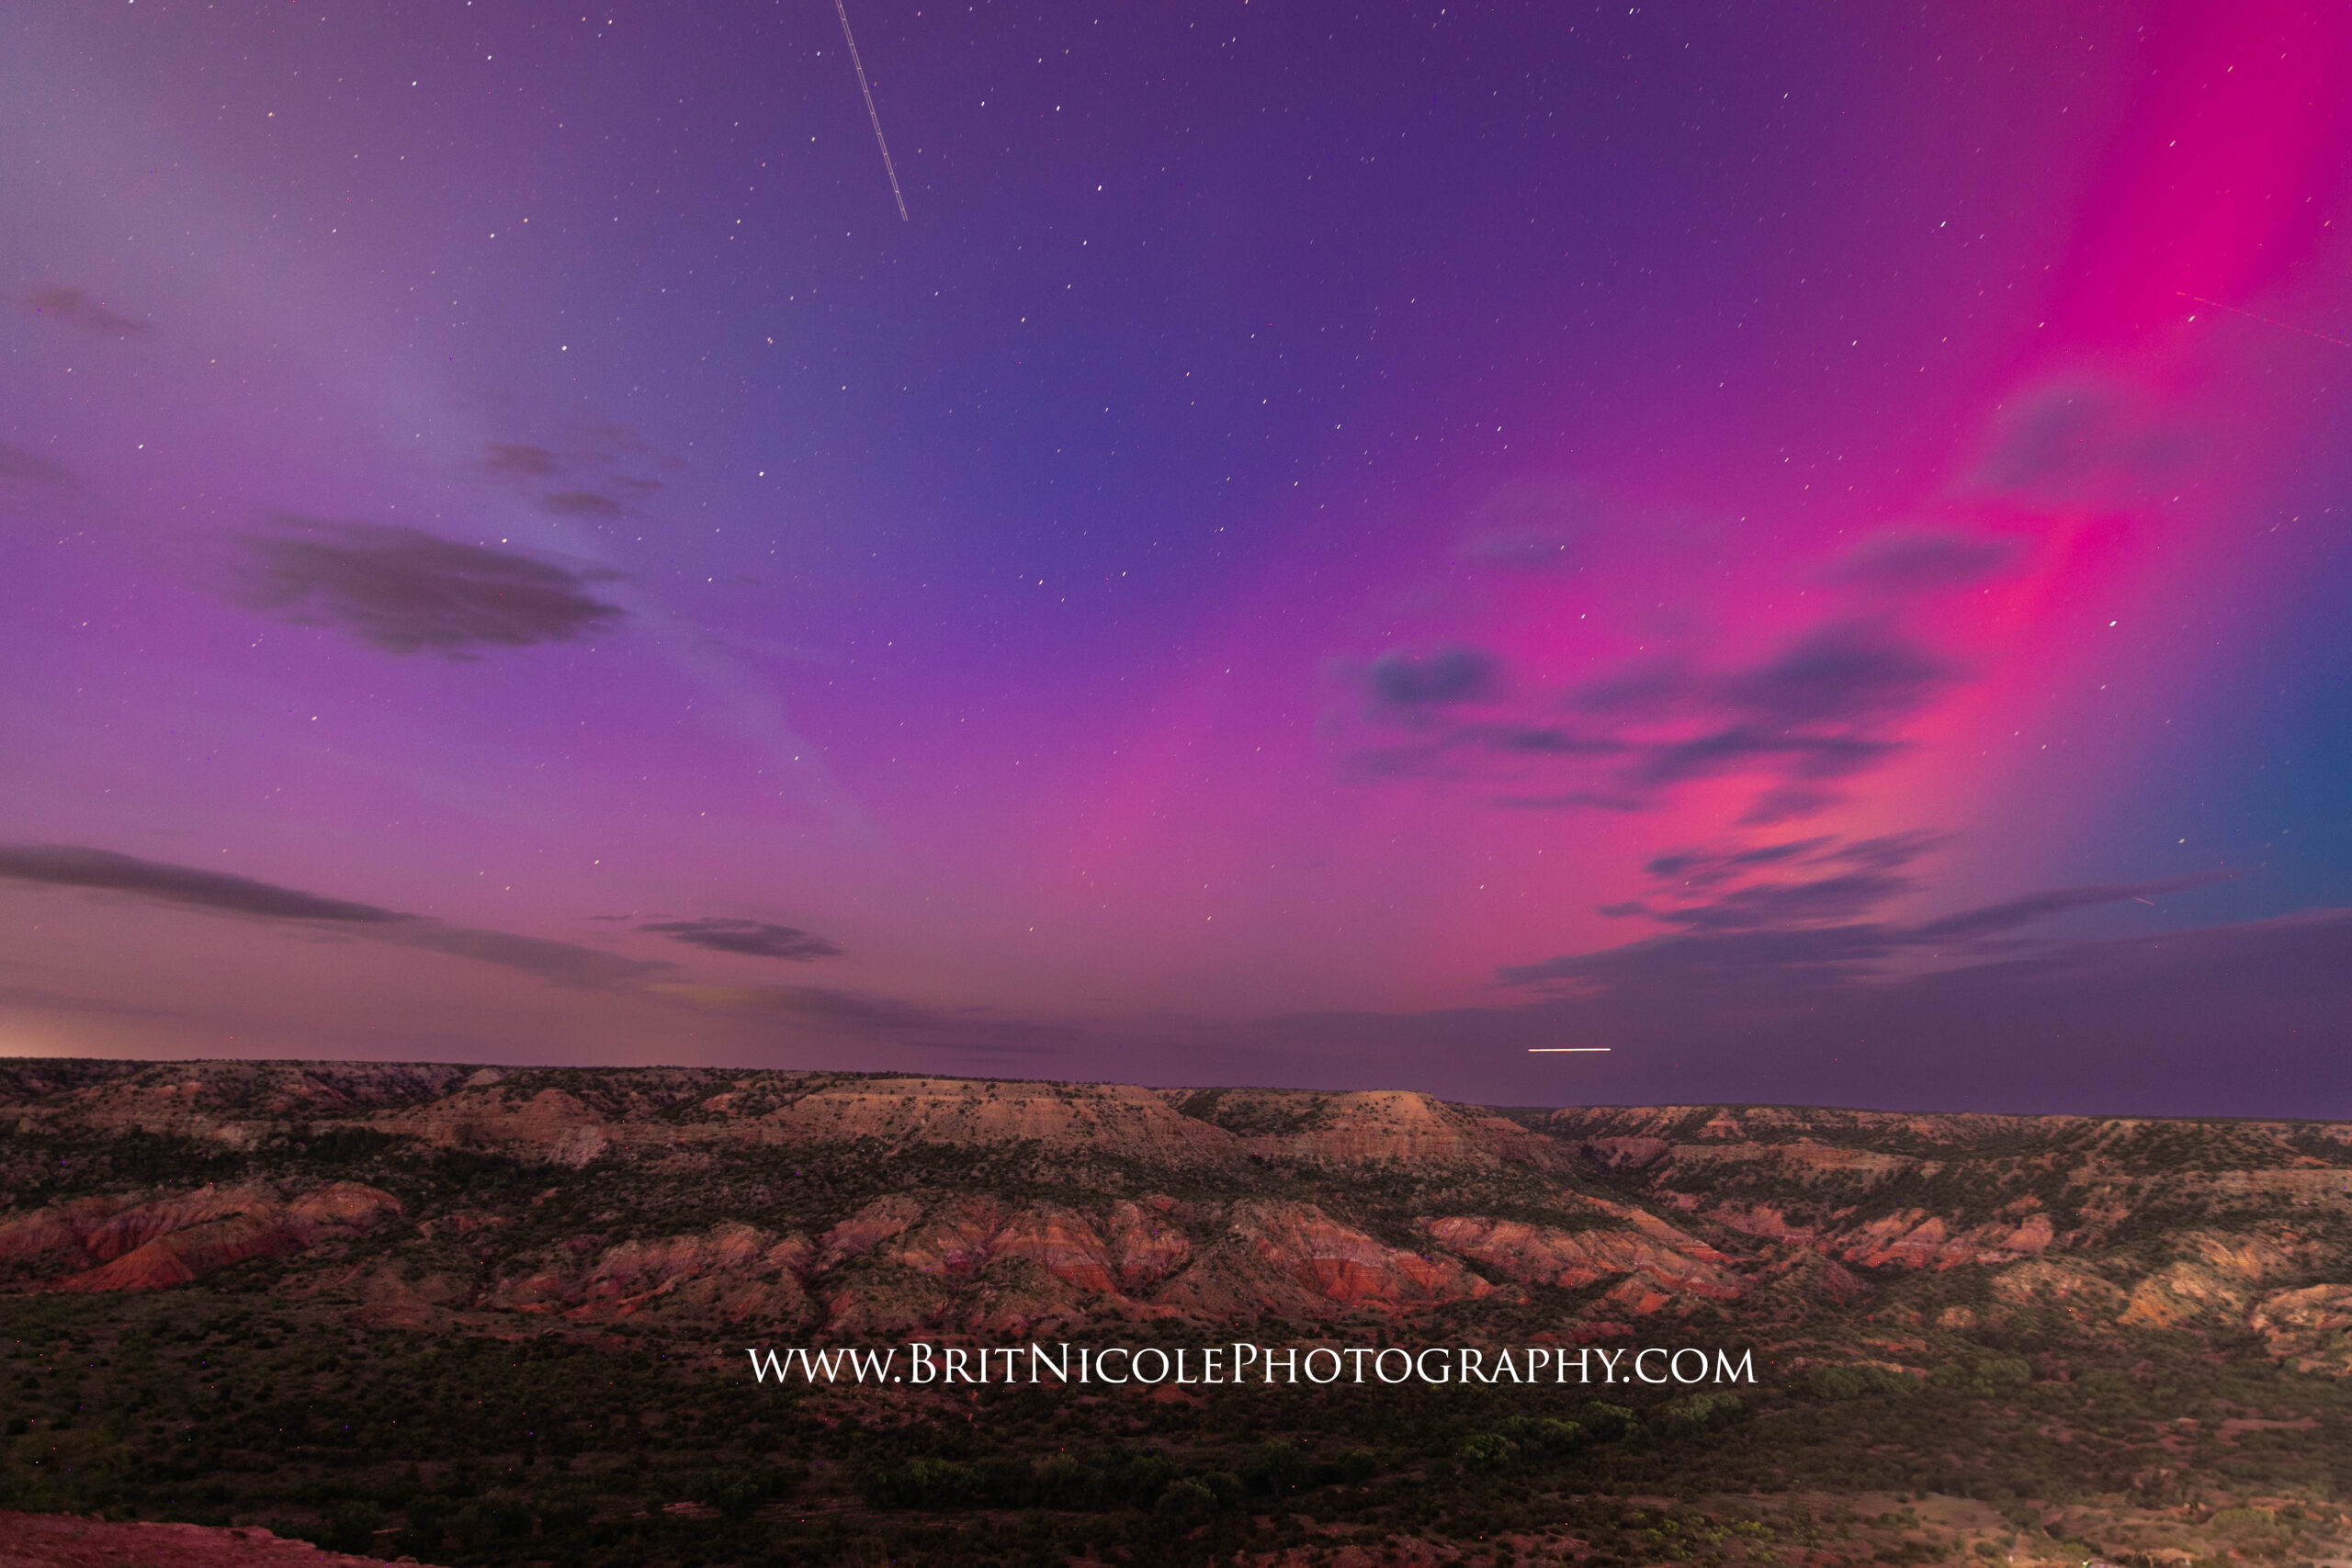 How to Take Photos of the Northern Lights, Northern lights in texas, northern lights photographer, how to find the northern lights, palo duro canyon